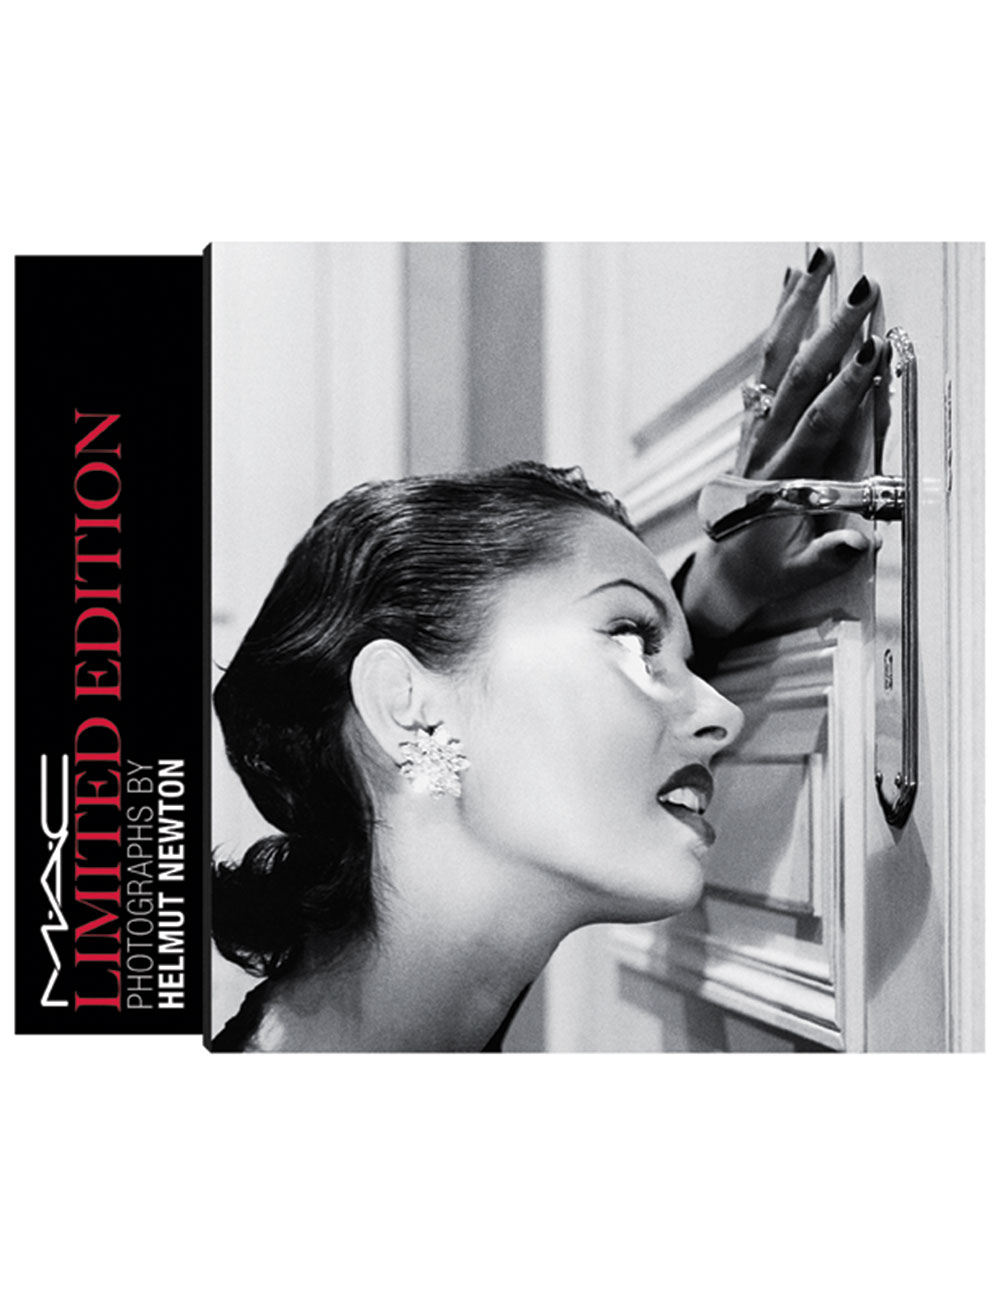 Helmut Newton photography features on the eye palette Point N Shoot box.